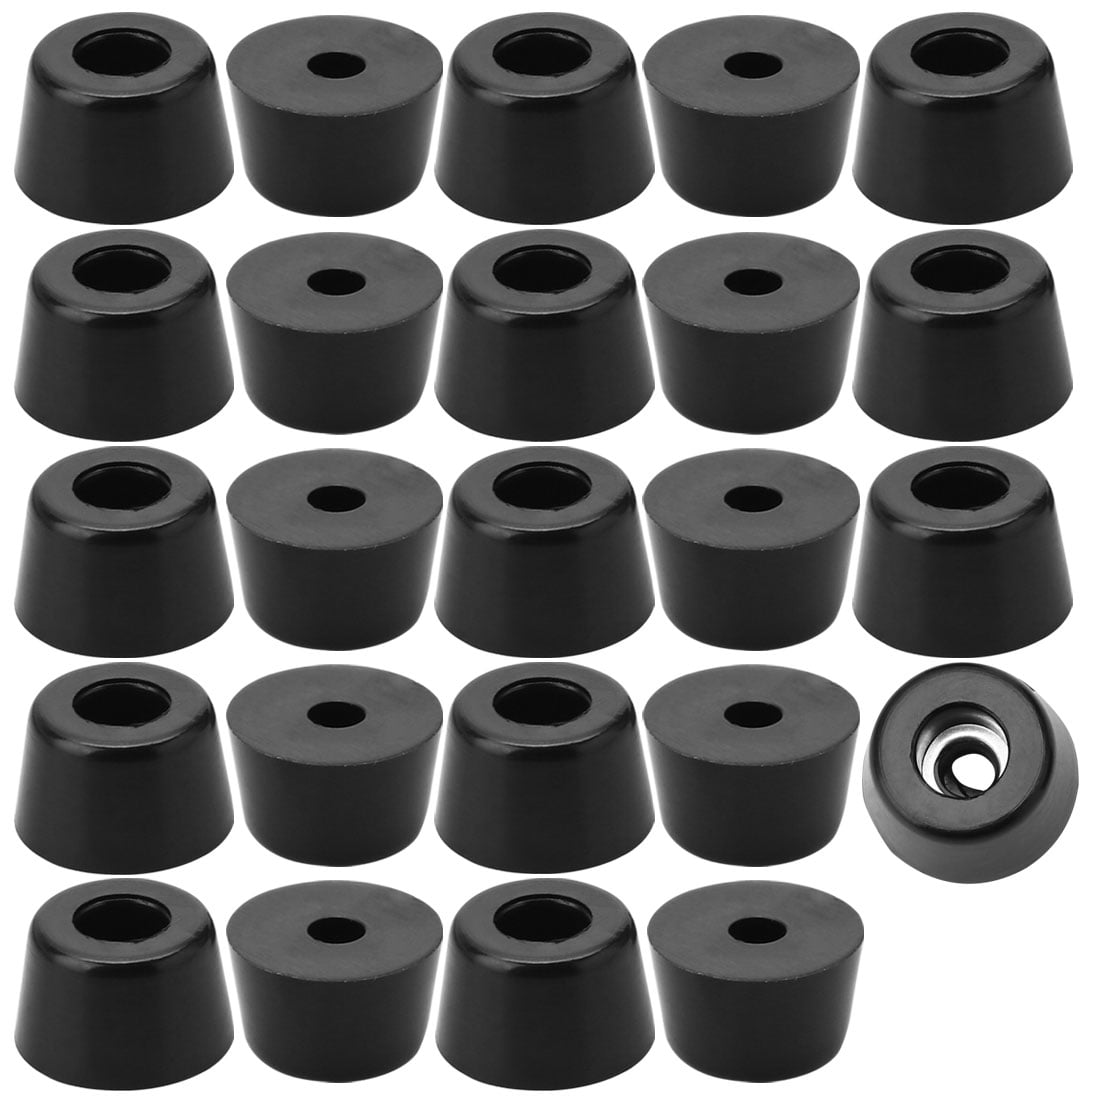 1 1/4" D x 3/4" H Rubber Feet Bumper Tapered w/ Washer Replacement Part Pack New 